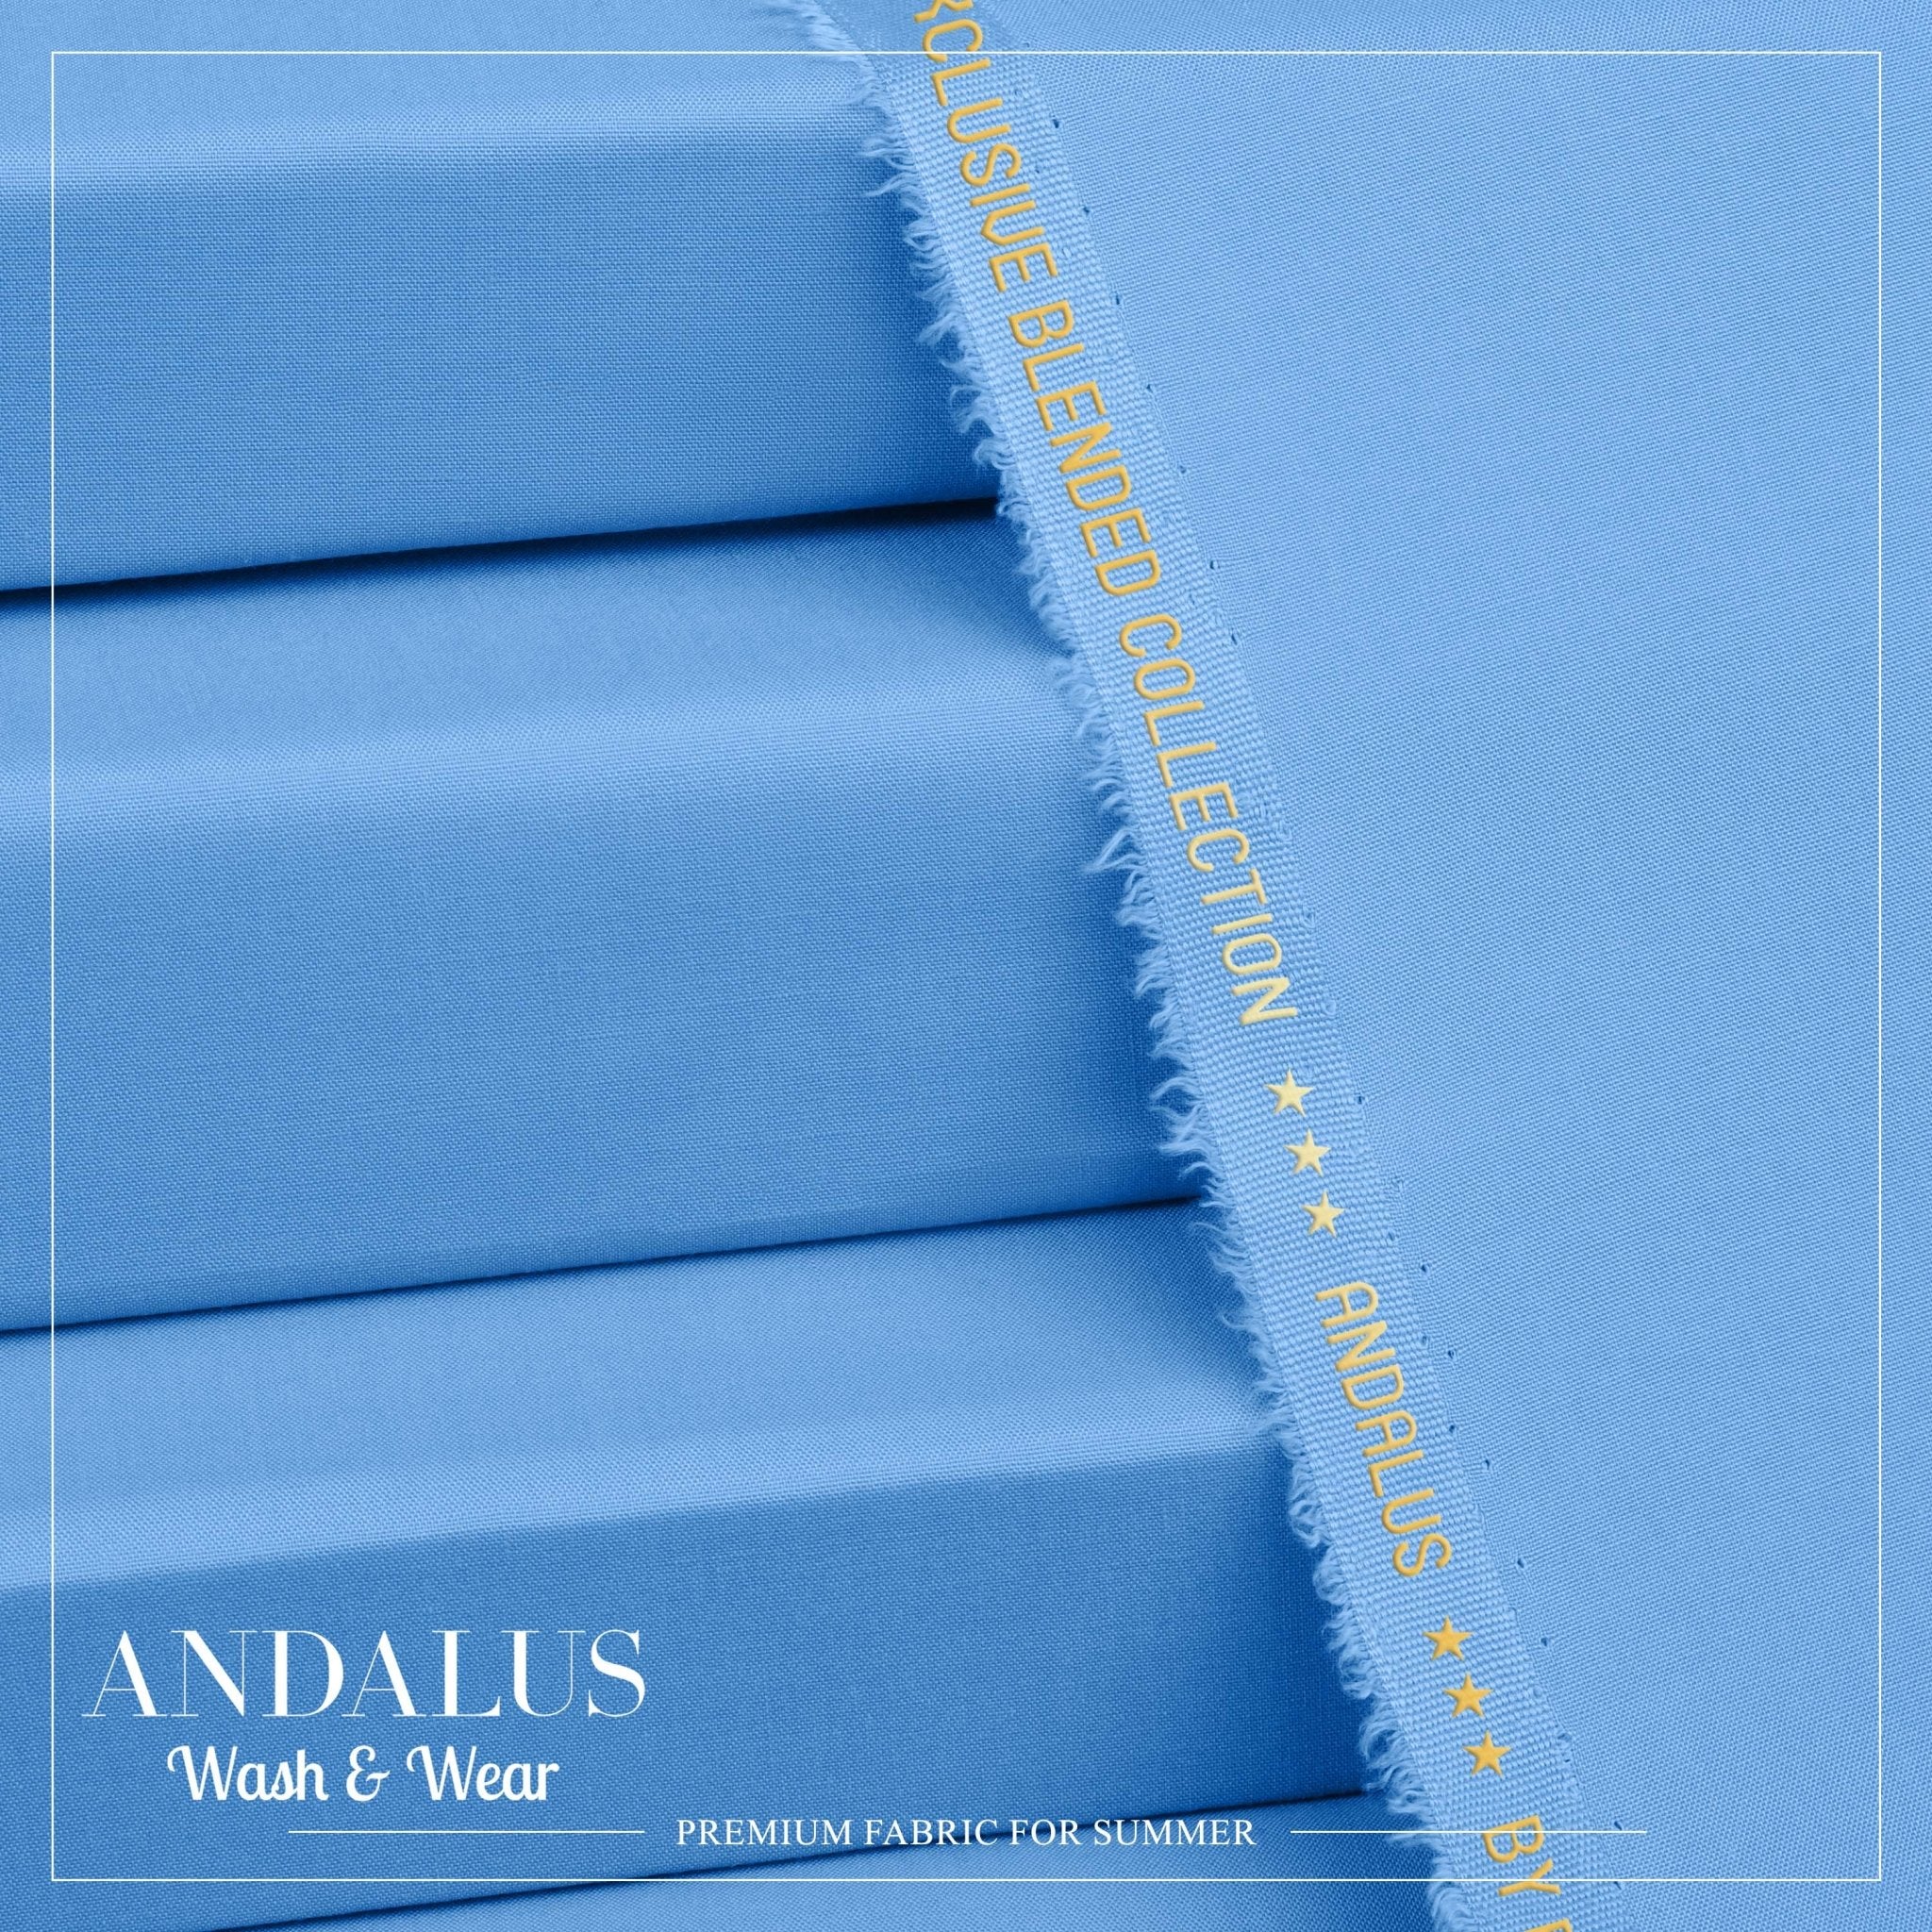 Teal - Andalus - Wash & Wear Fabric